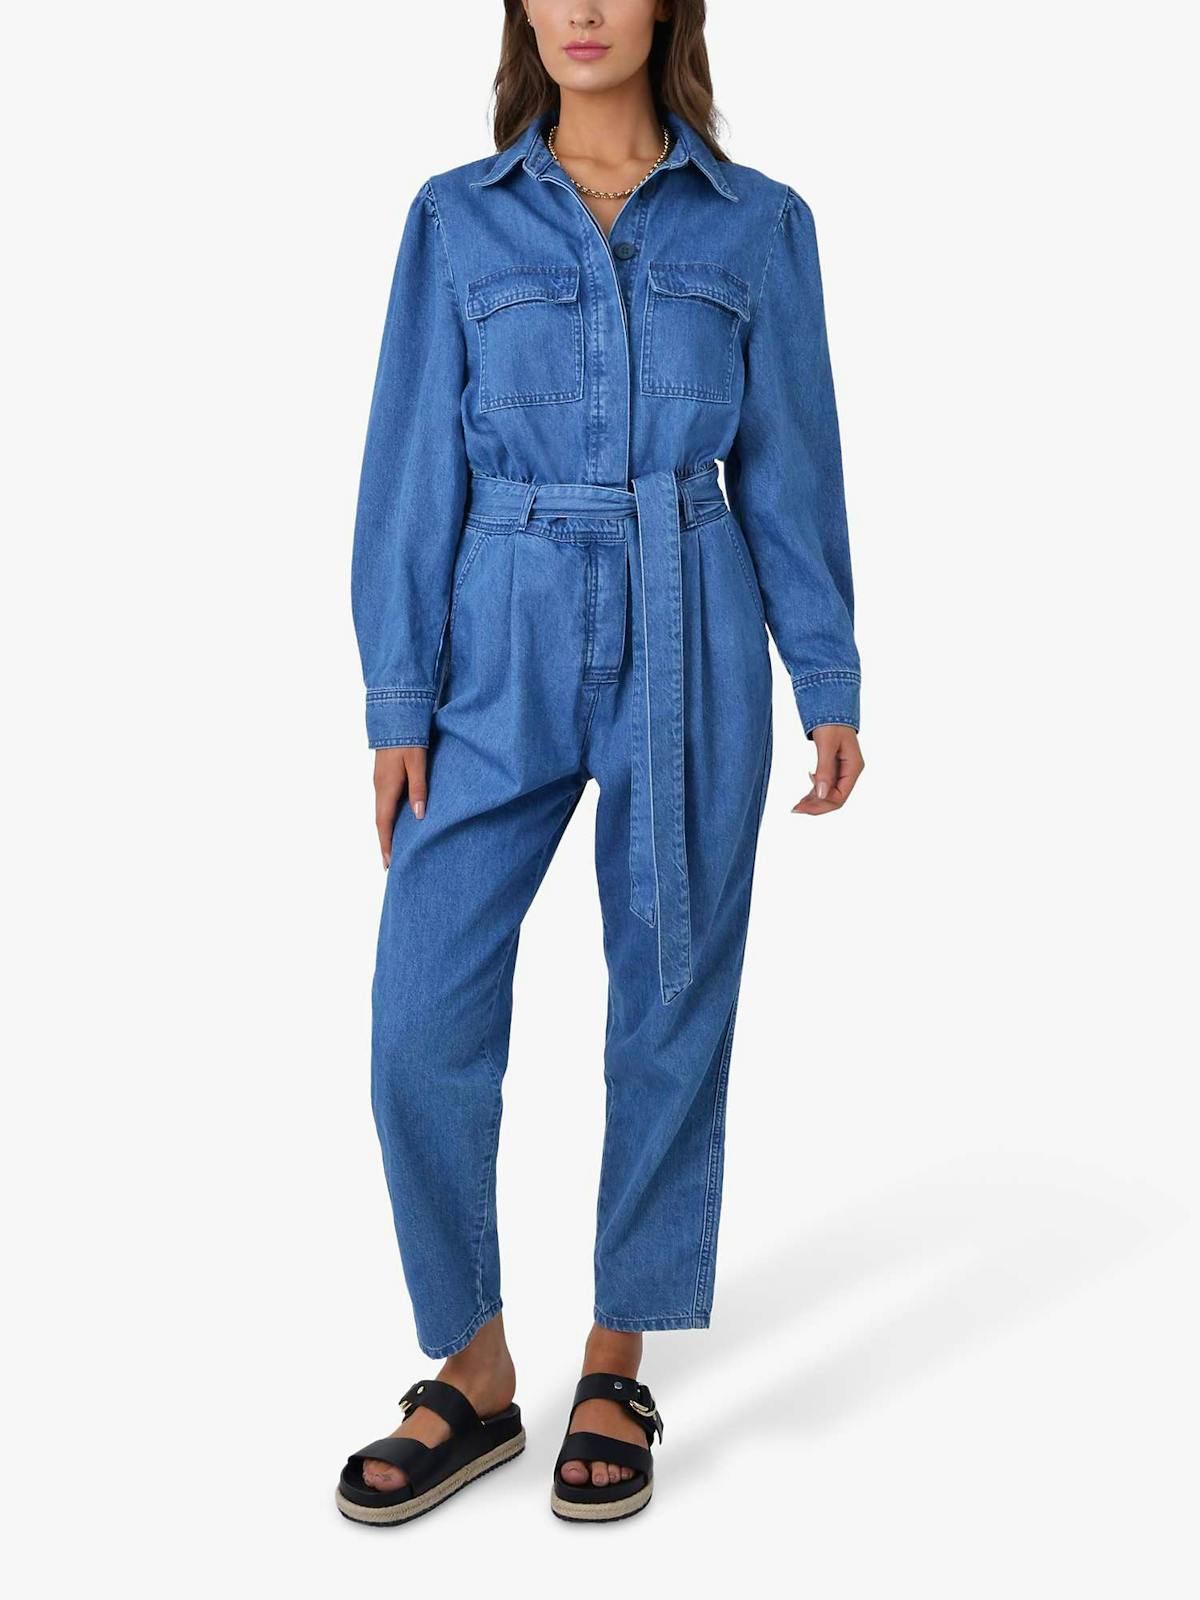 8 best denim boilersuits: from Zara to Whistles